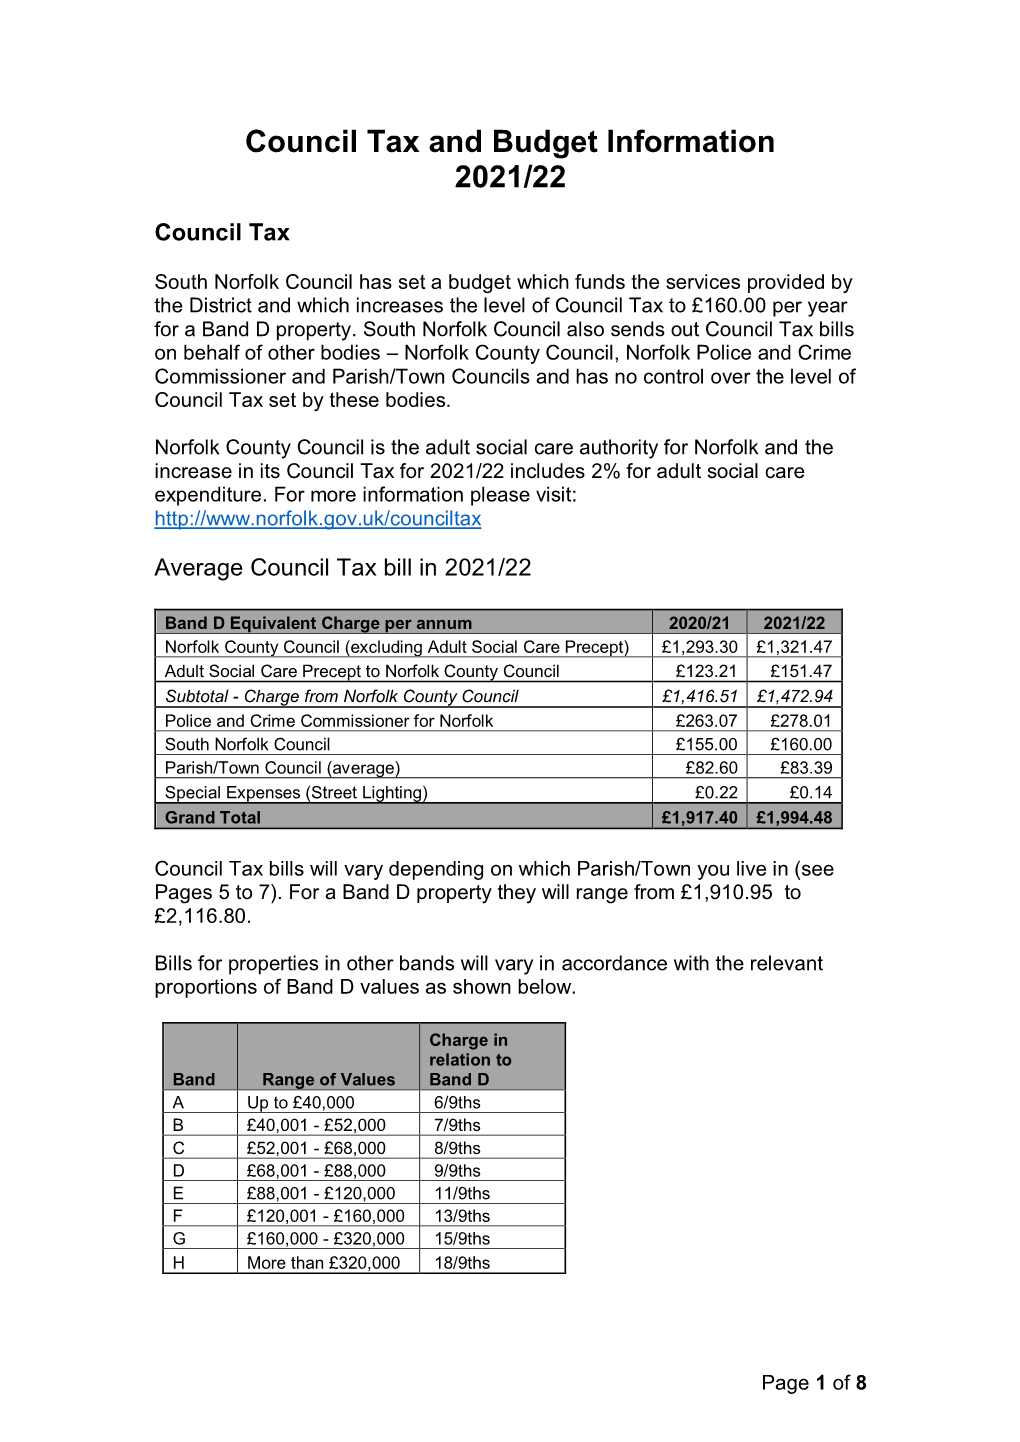 Council Tax and Budget Information 2021/22